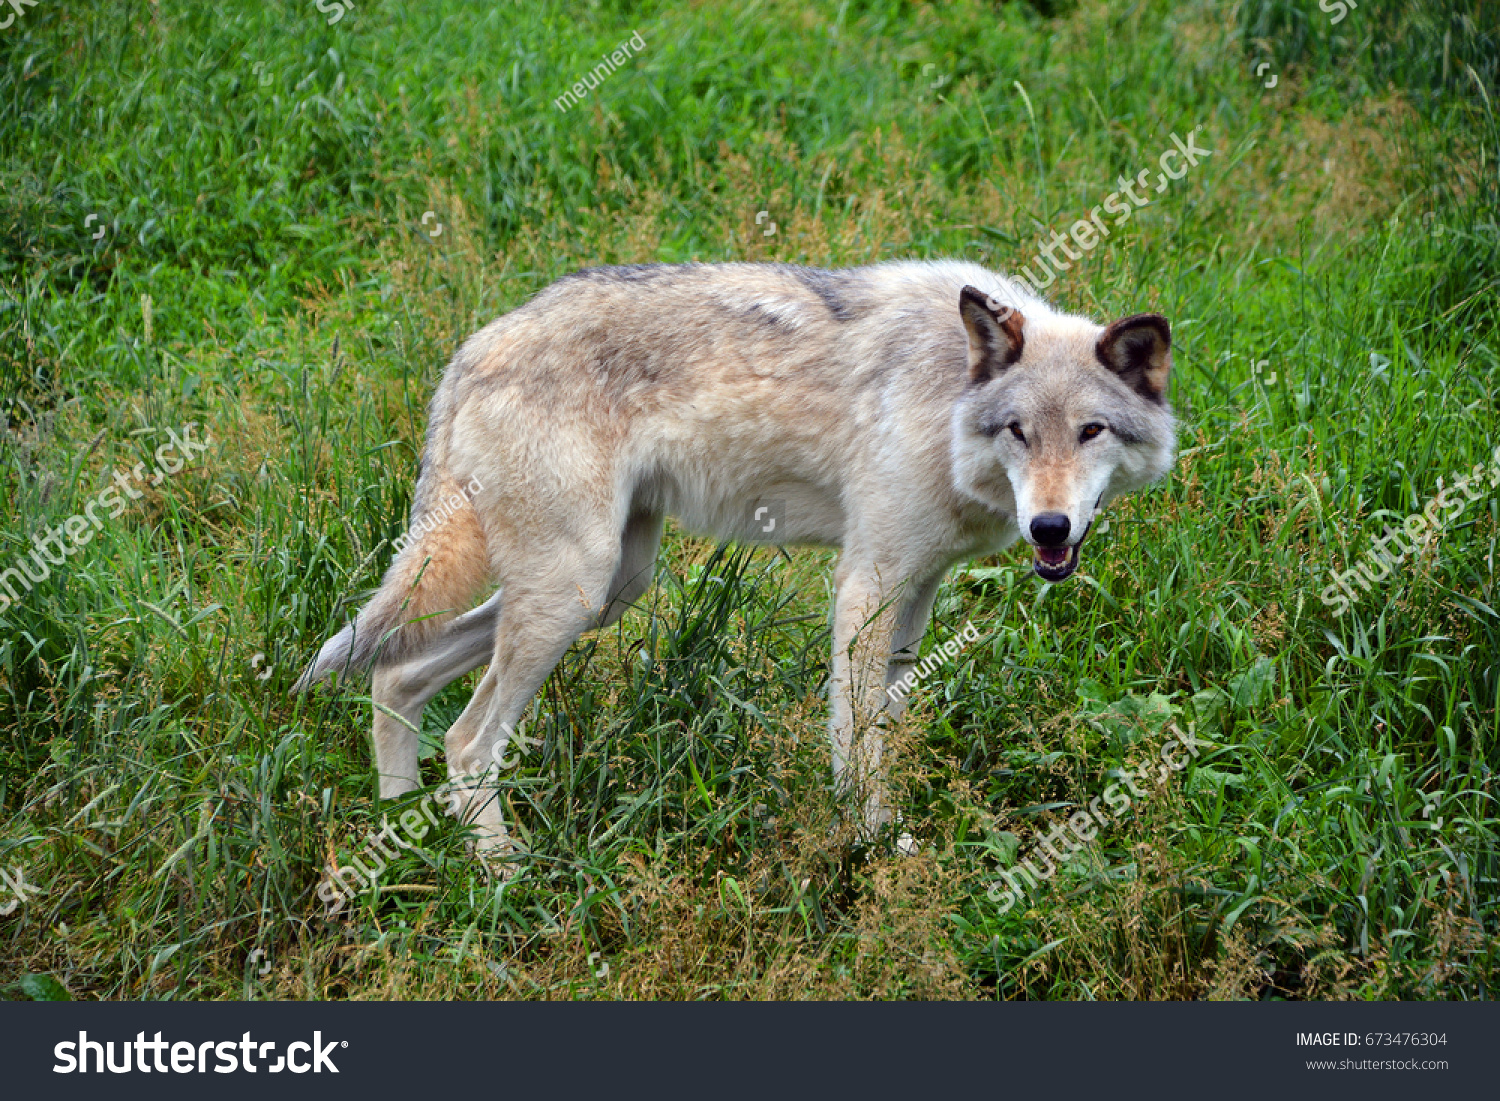 Gray wolf or grey wolf Canis lupus, also timber or western wolf is a canine native to the wilderness and remote areas of Eurasia and North America. It is the largest extant member of its family #673476304